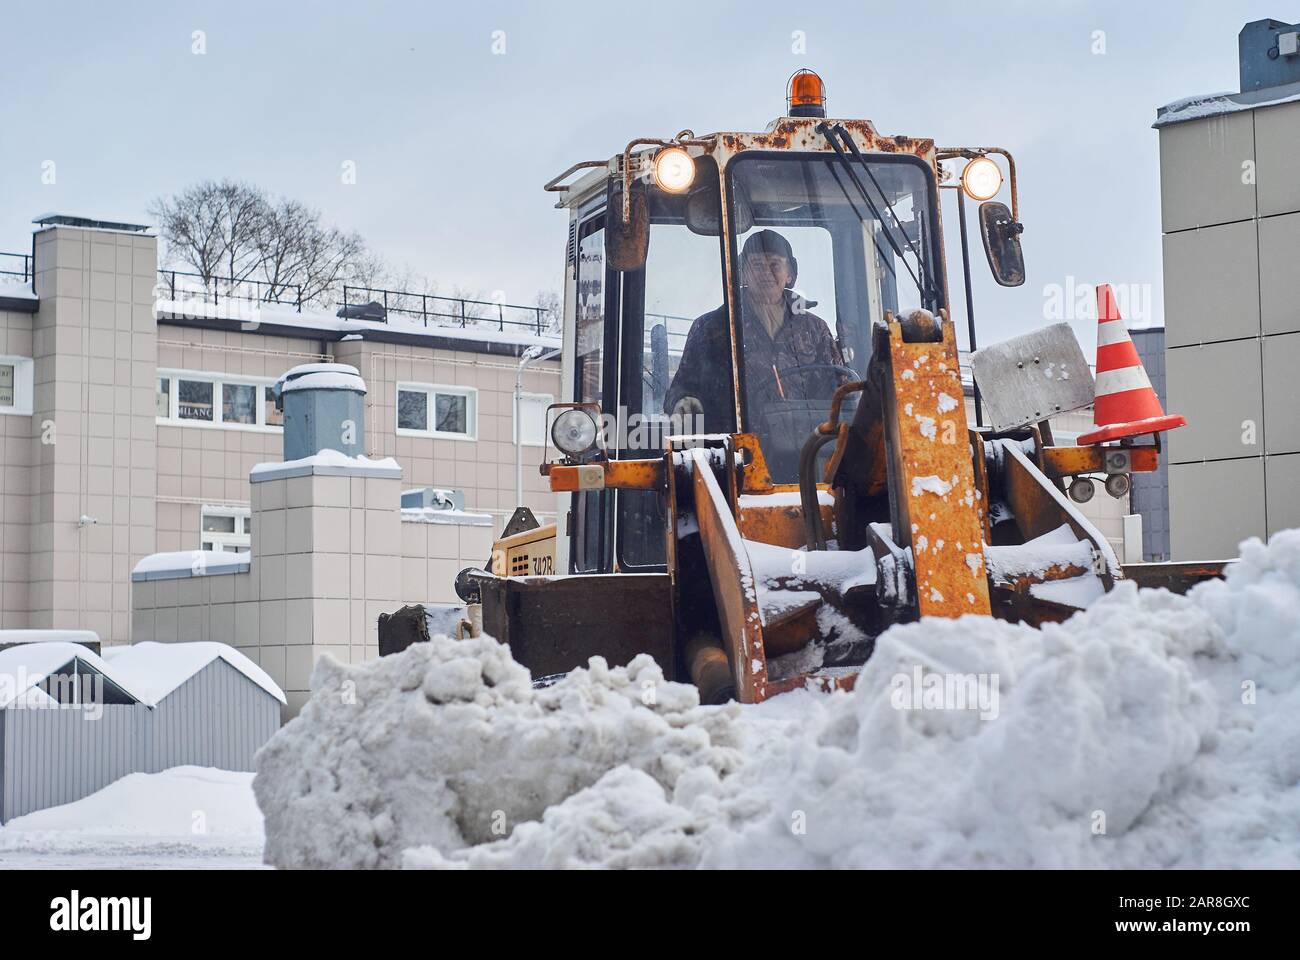 Perm, Russia - Jauary 26, 2020: loader removing snowdrift in city courtyard Stock Photo